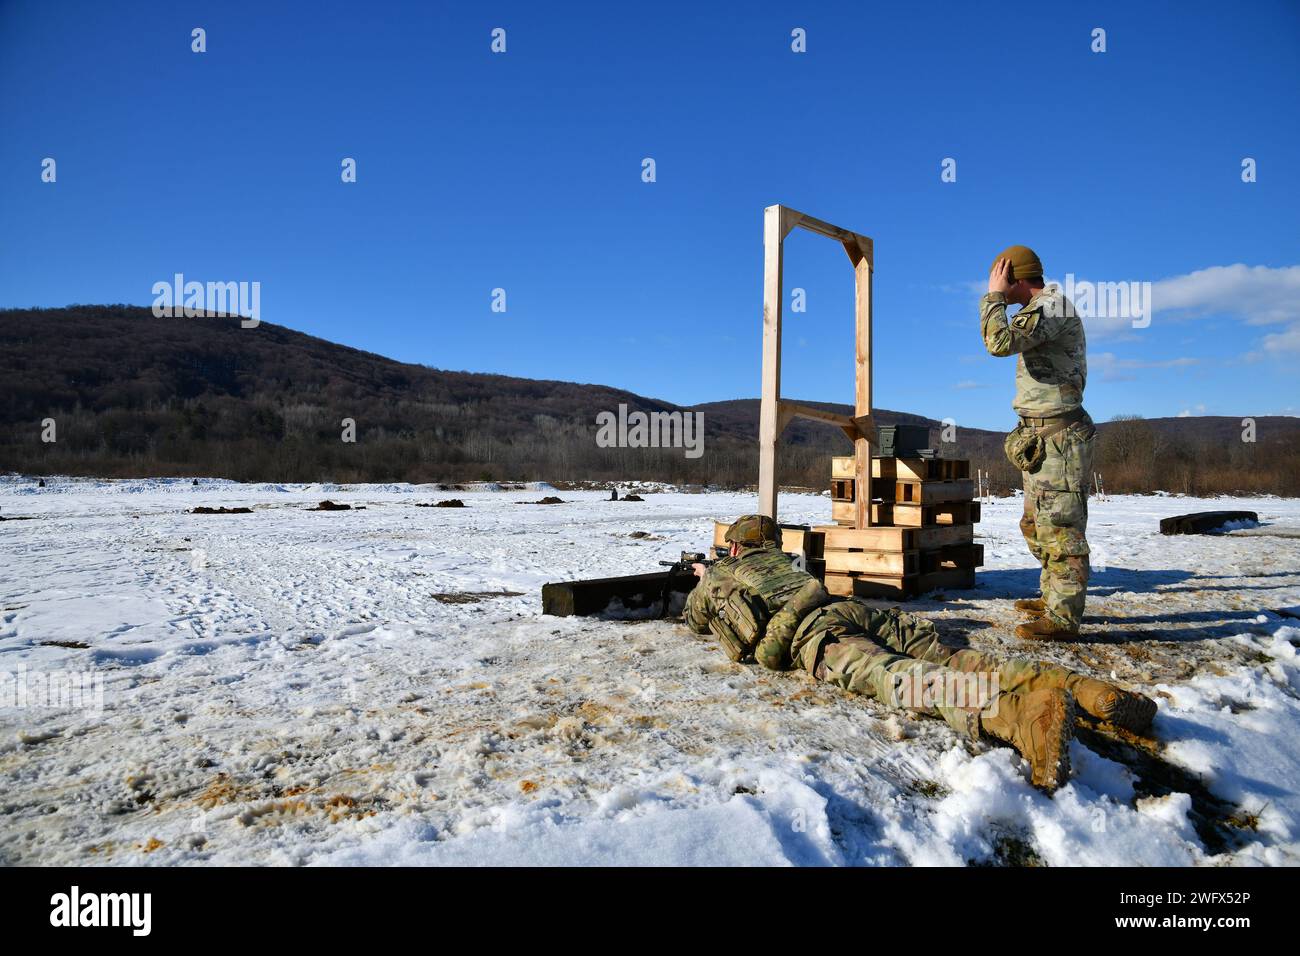 A U. S. Army paratrooper assigned to the 54th Brigade Engineer Battalion, 173rd Airborne Brigade, engages targets with the M4 Carbine during a live-fire exercise as part of Castle Dvorac 24 in Slunj, Croatia, Jan. 23, 2024. The 173rd Airborne Brigade is the U.S. Army's Contingency Response Force in Europe, providing rapidly deployable forces to the United States European, African, and Central Command areas of responsibility. Forward deployed across Italy and Germany, the brigade routinely trains alongside NATO allies and partners to build partnerships and strengthen the alliance. Stock Photo